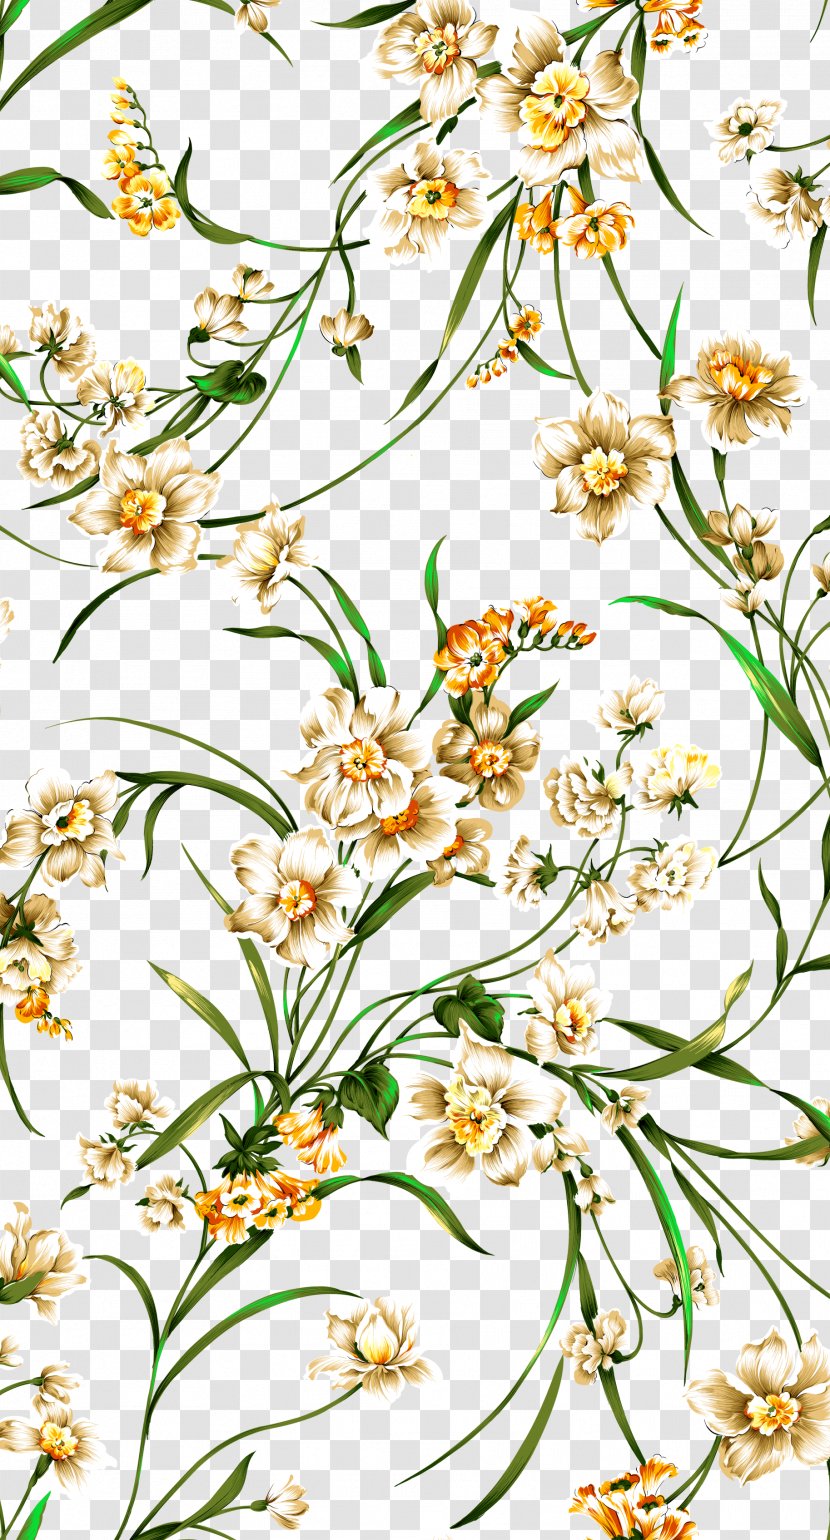 Orchids Flower Postgraduate Admission Test - Pattern - Hand-painted Orchid Background Transparent PNG